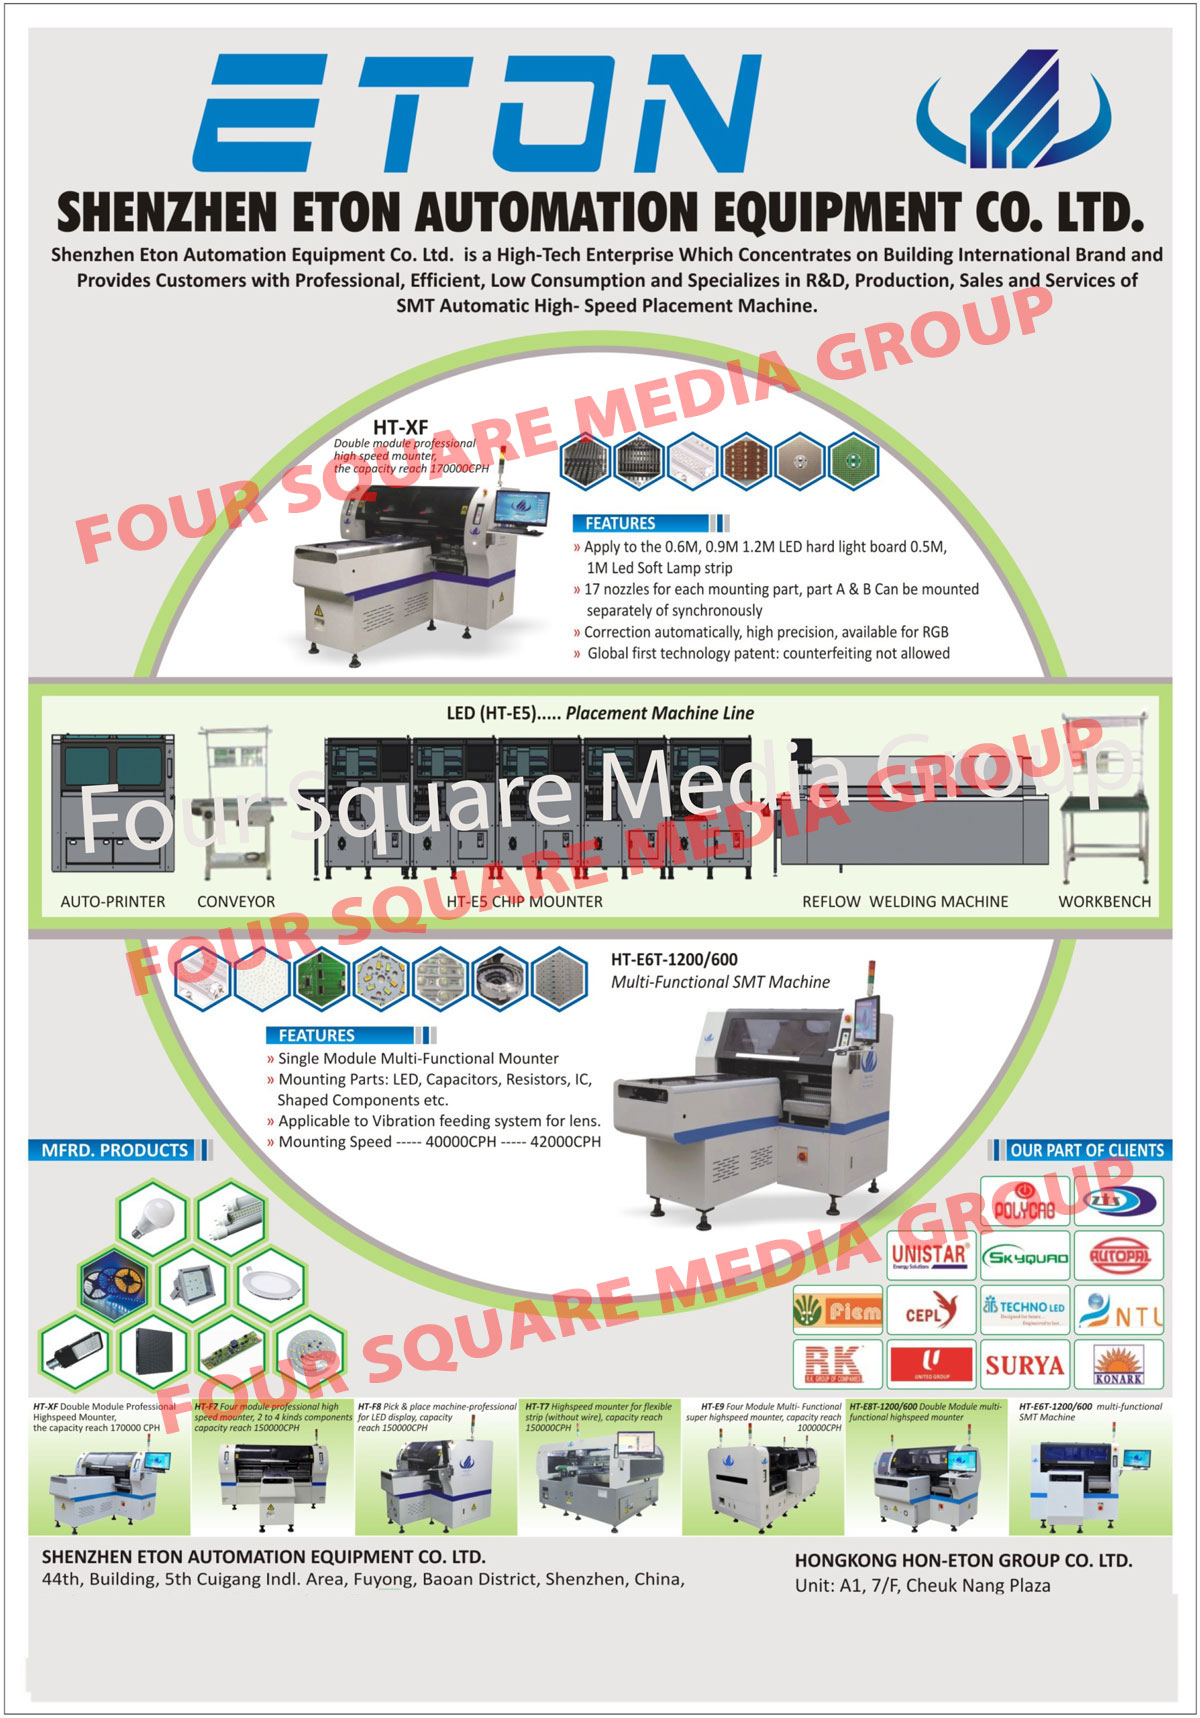 Multi Functional SMT Machines, Double Module High Speed Mounter Machine, Double Module High Speed Mounter, Four Module High Speed Mounter, Flexible Strip Highspeed Mounter, Led Display Pick And Place Machine